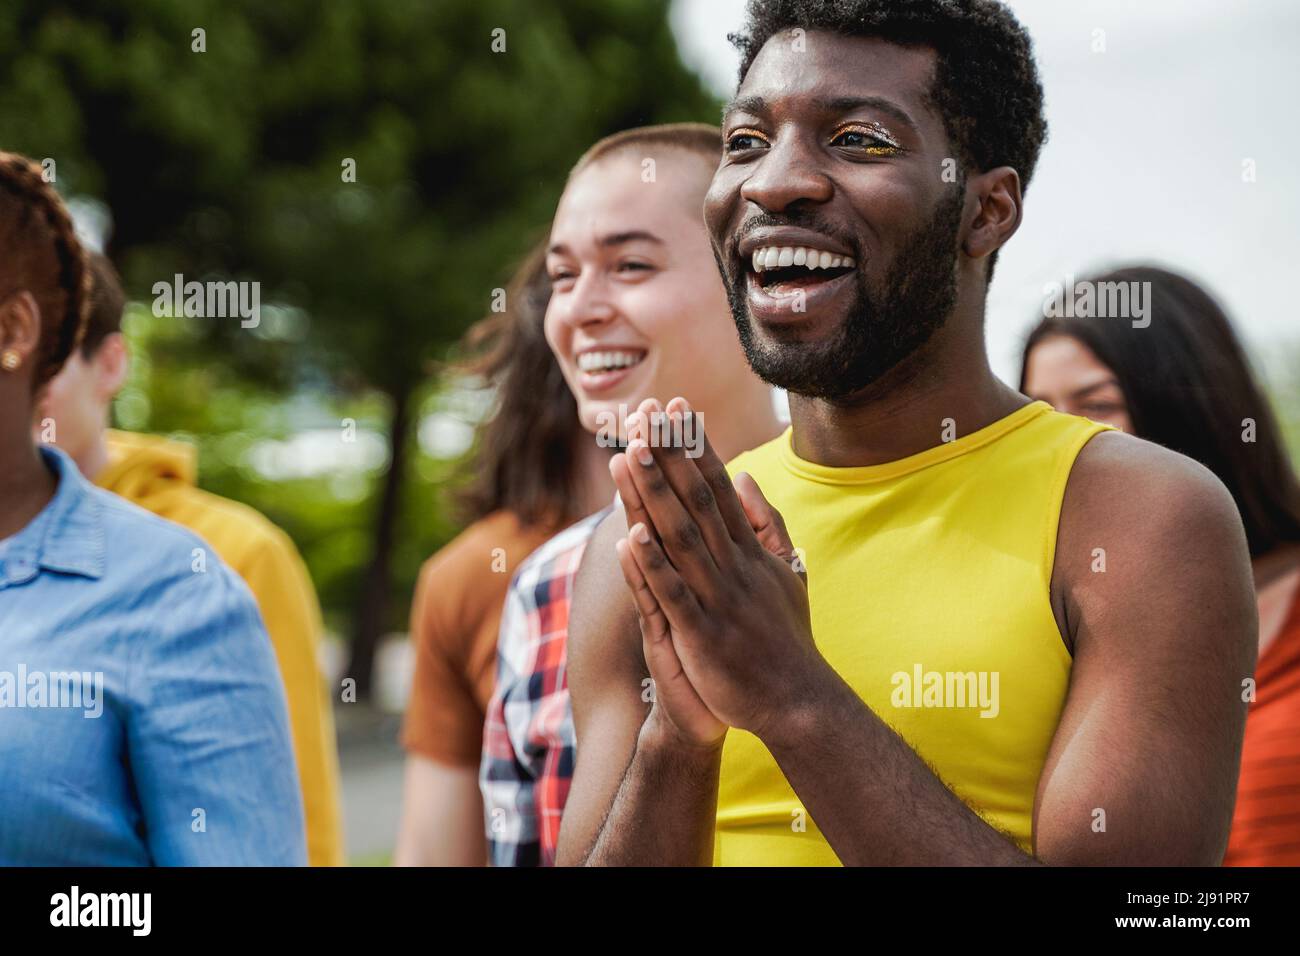 Multiethnic diverse people celebrating together outdoor at pride event - Focus on gay african man with make-up Stock Photo